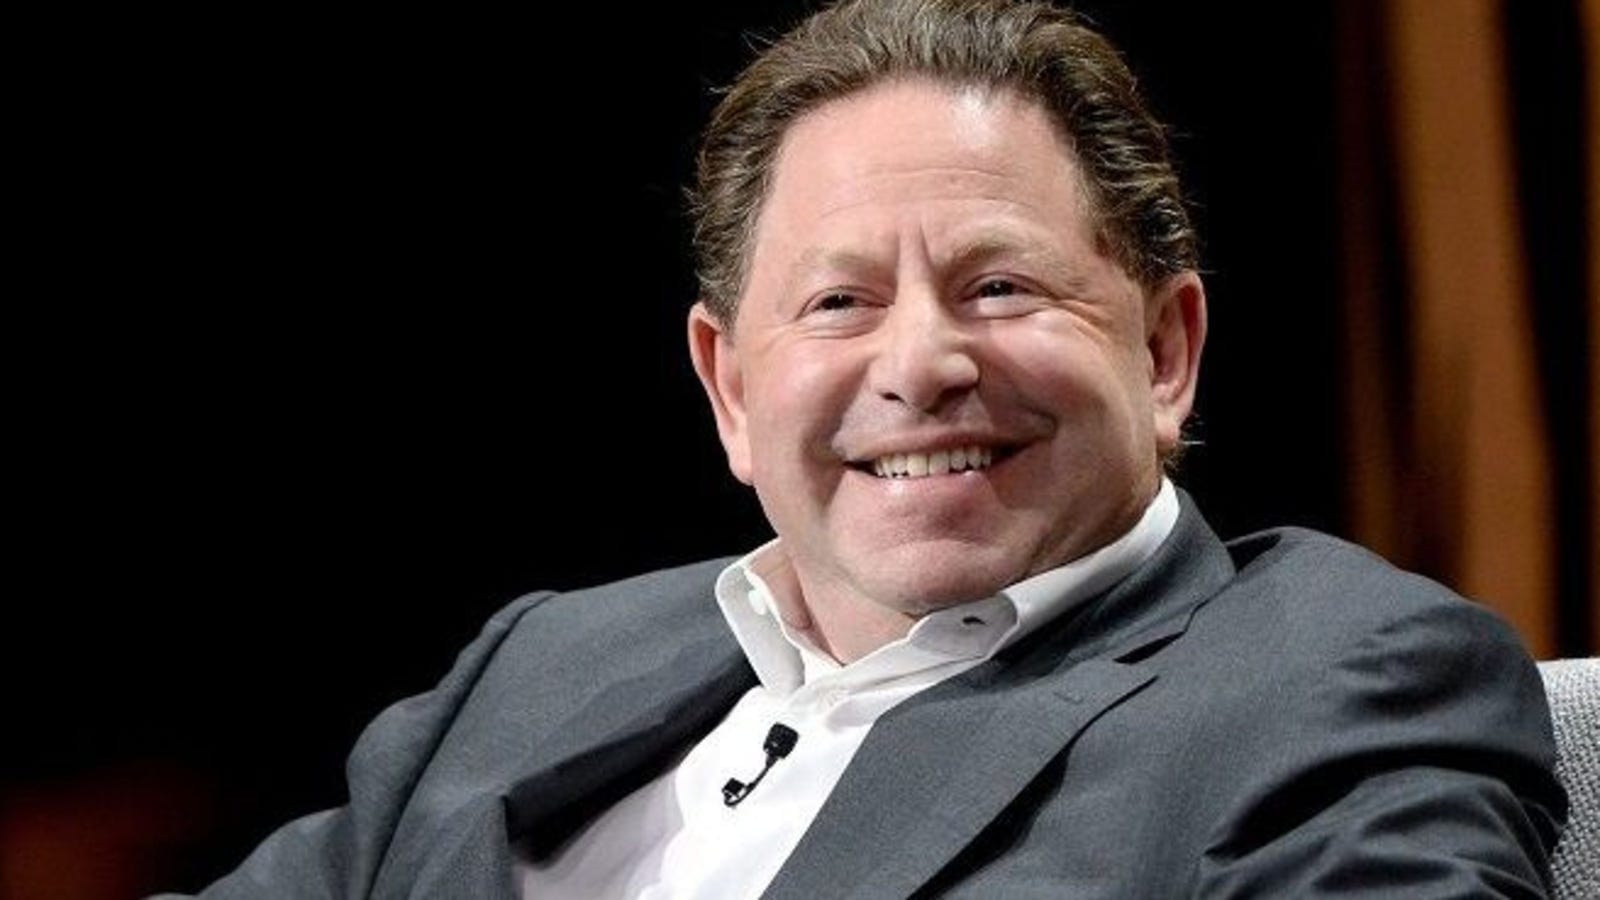 Activision Blizzard boss Bobby Kotick expected to leave once Microsoft deal  closes - report | Eurogamer.net